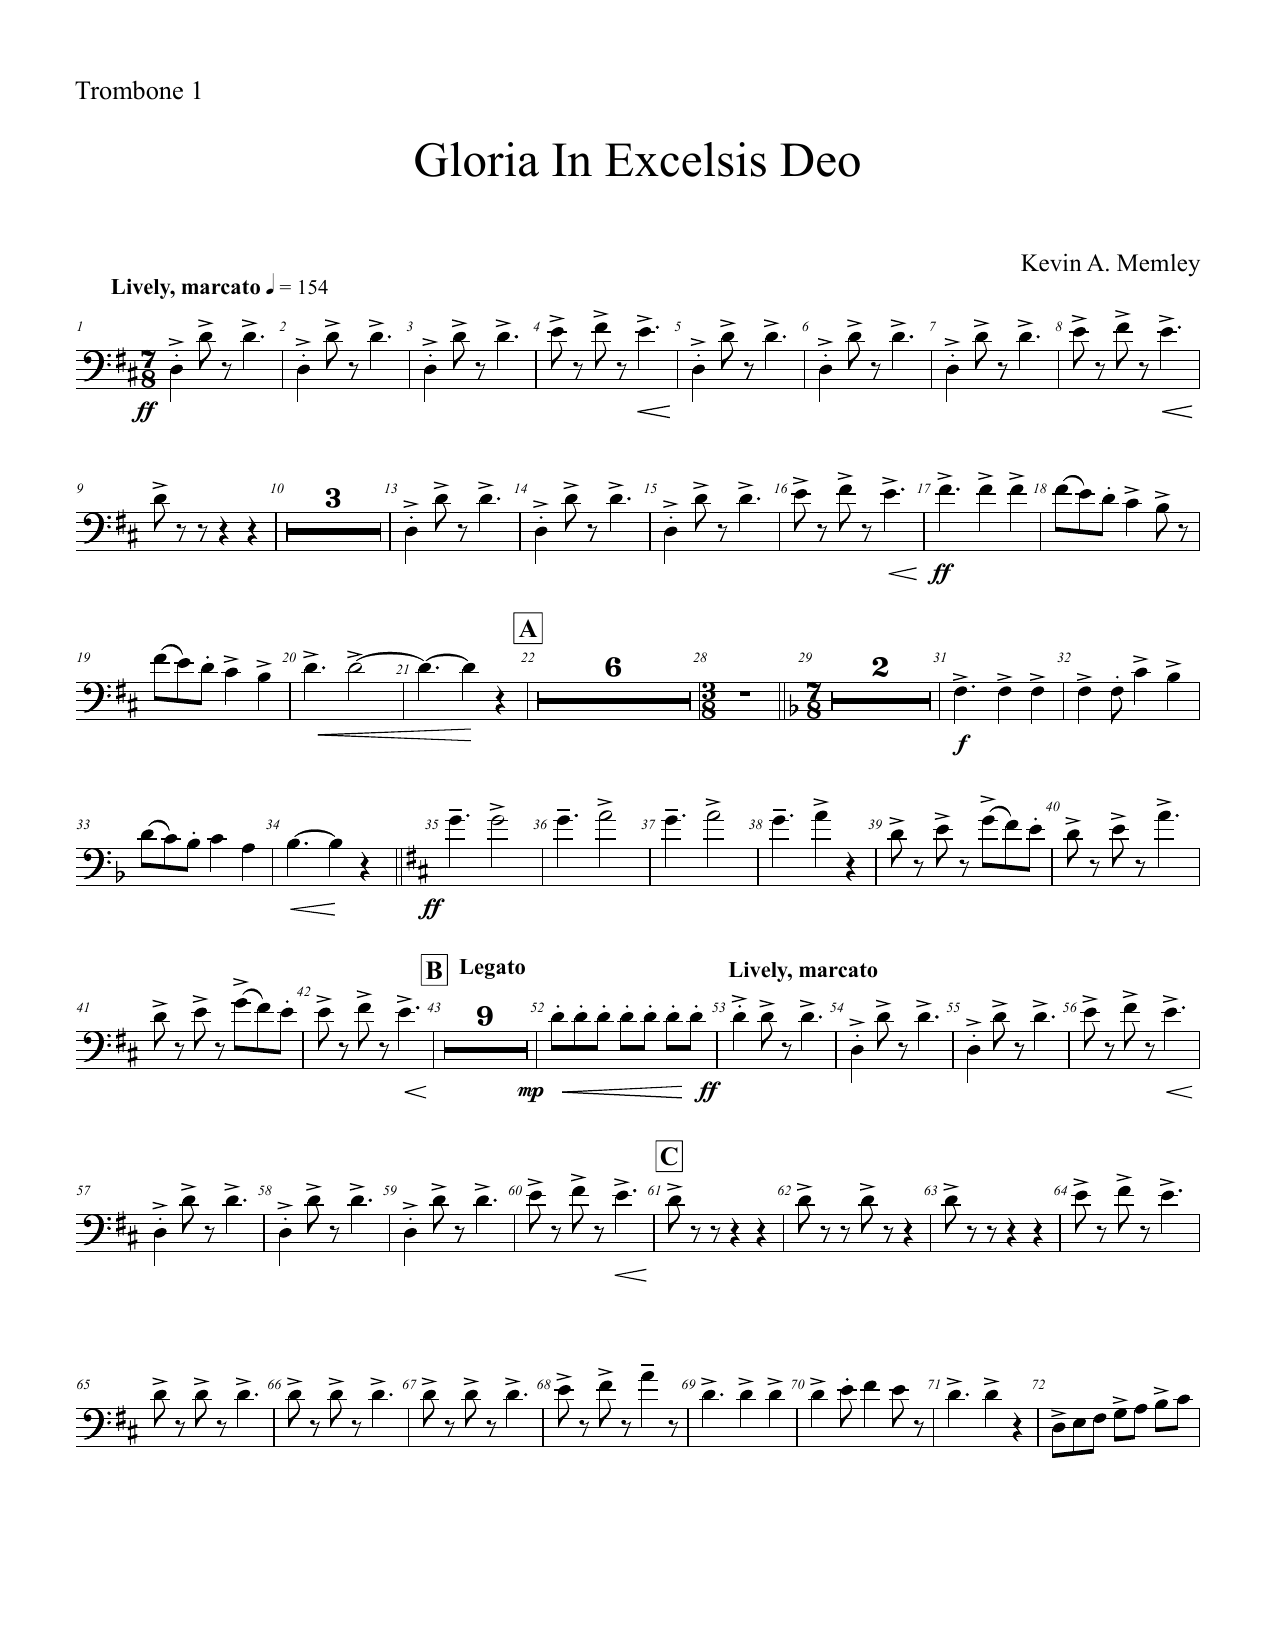 Download Kevin A. Memley Gloria in Excelsis Deo - Trombone 1 Sheet Music